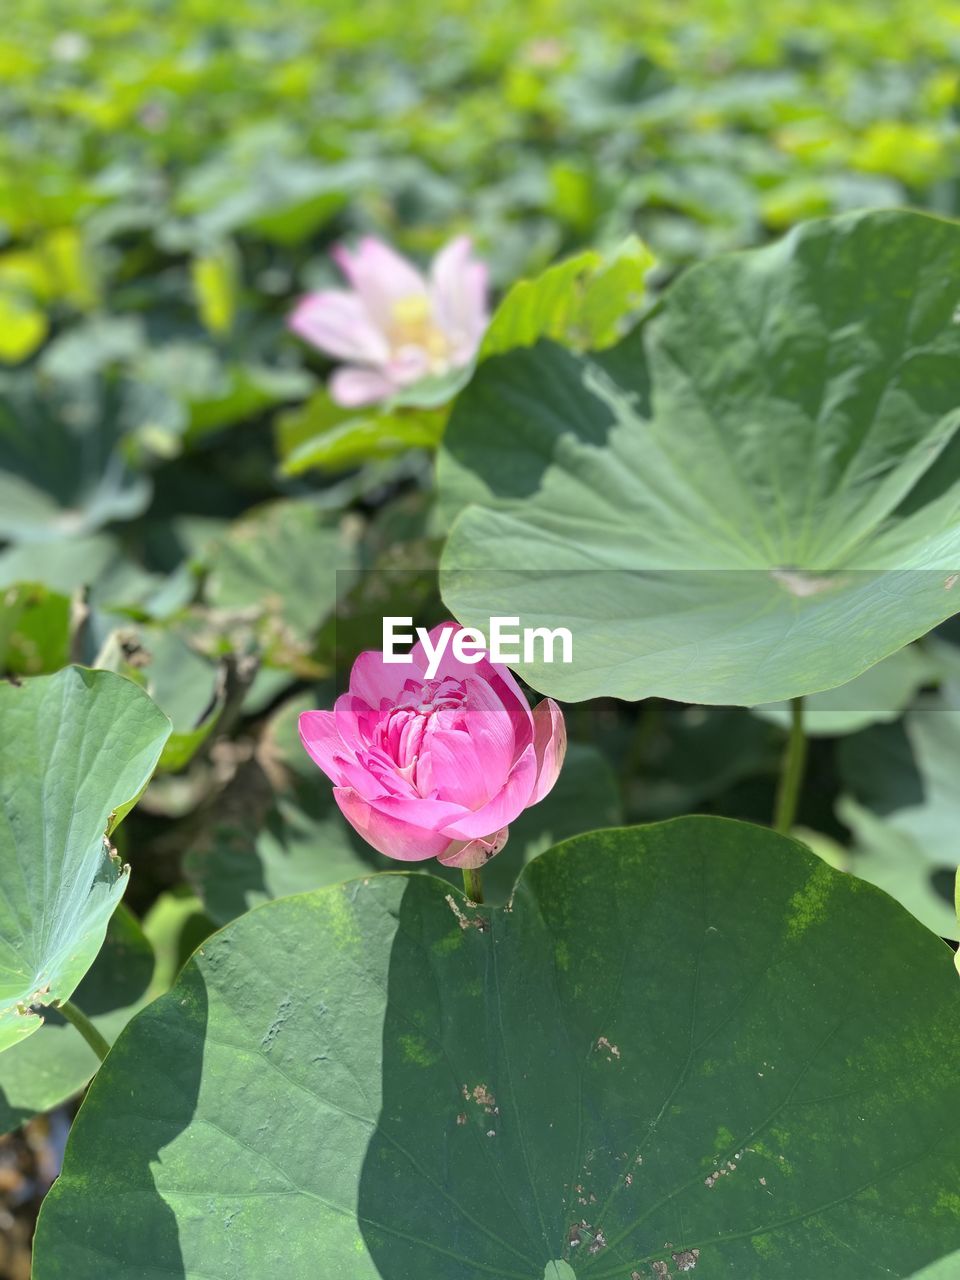 plant, flower, leaf, plant part, flowering plant, freshness, beauty in nature, pink, nature, petal, growth, green, close-up, flower head, inflorescence, fragility, rose, no people, outdoors, day, water, water lily, springtime, botany, bud, sunlight, blossom